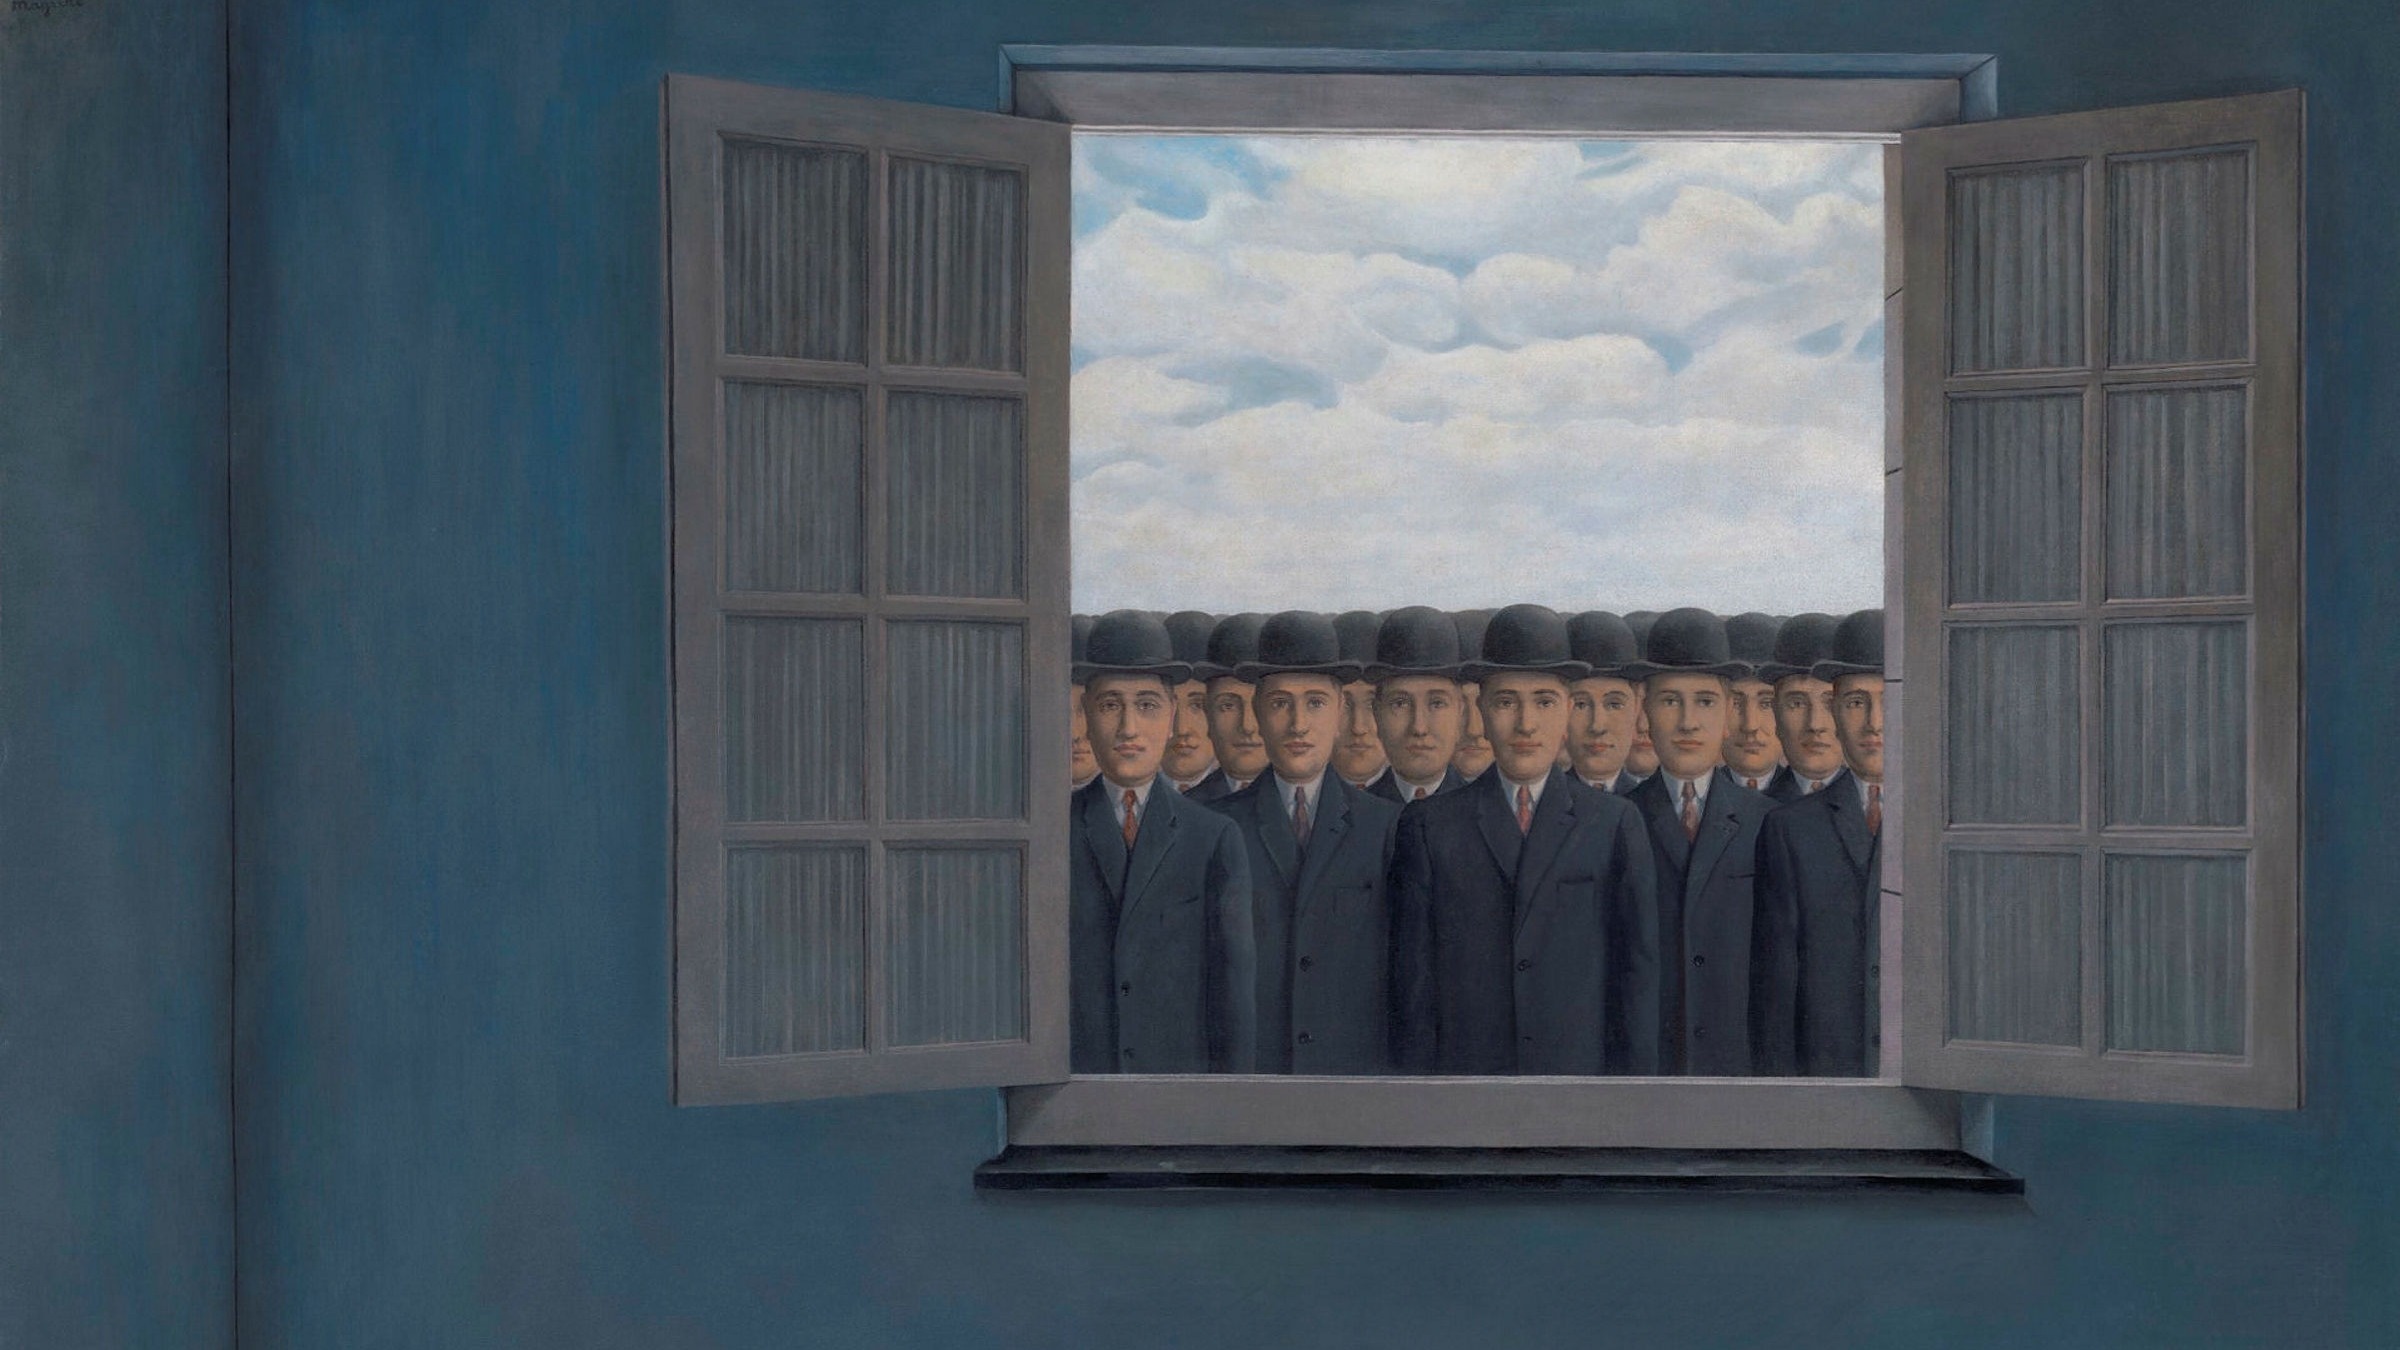 Magritte art sale, Financial investment, Art market potential, Record-breaking prices, 2400x1350 HD Desktop